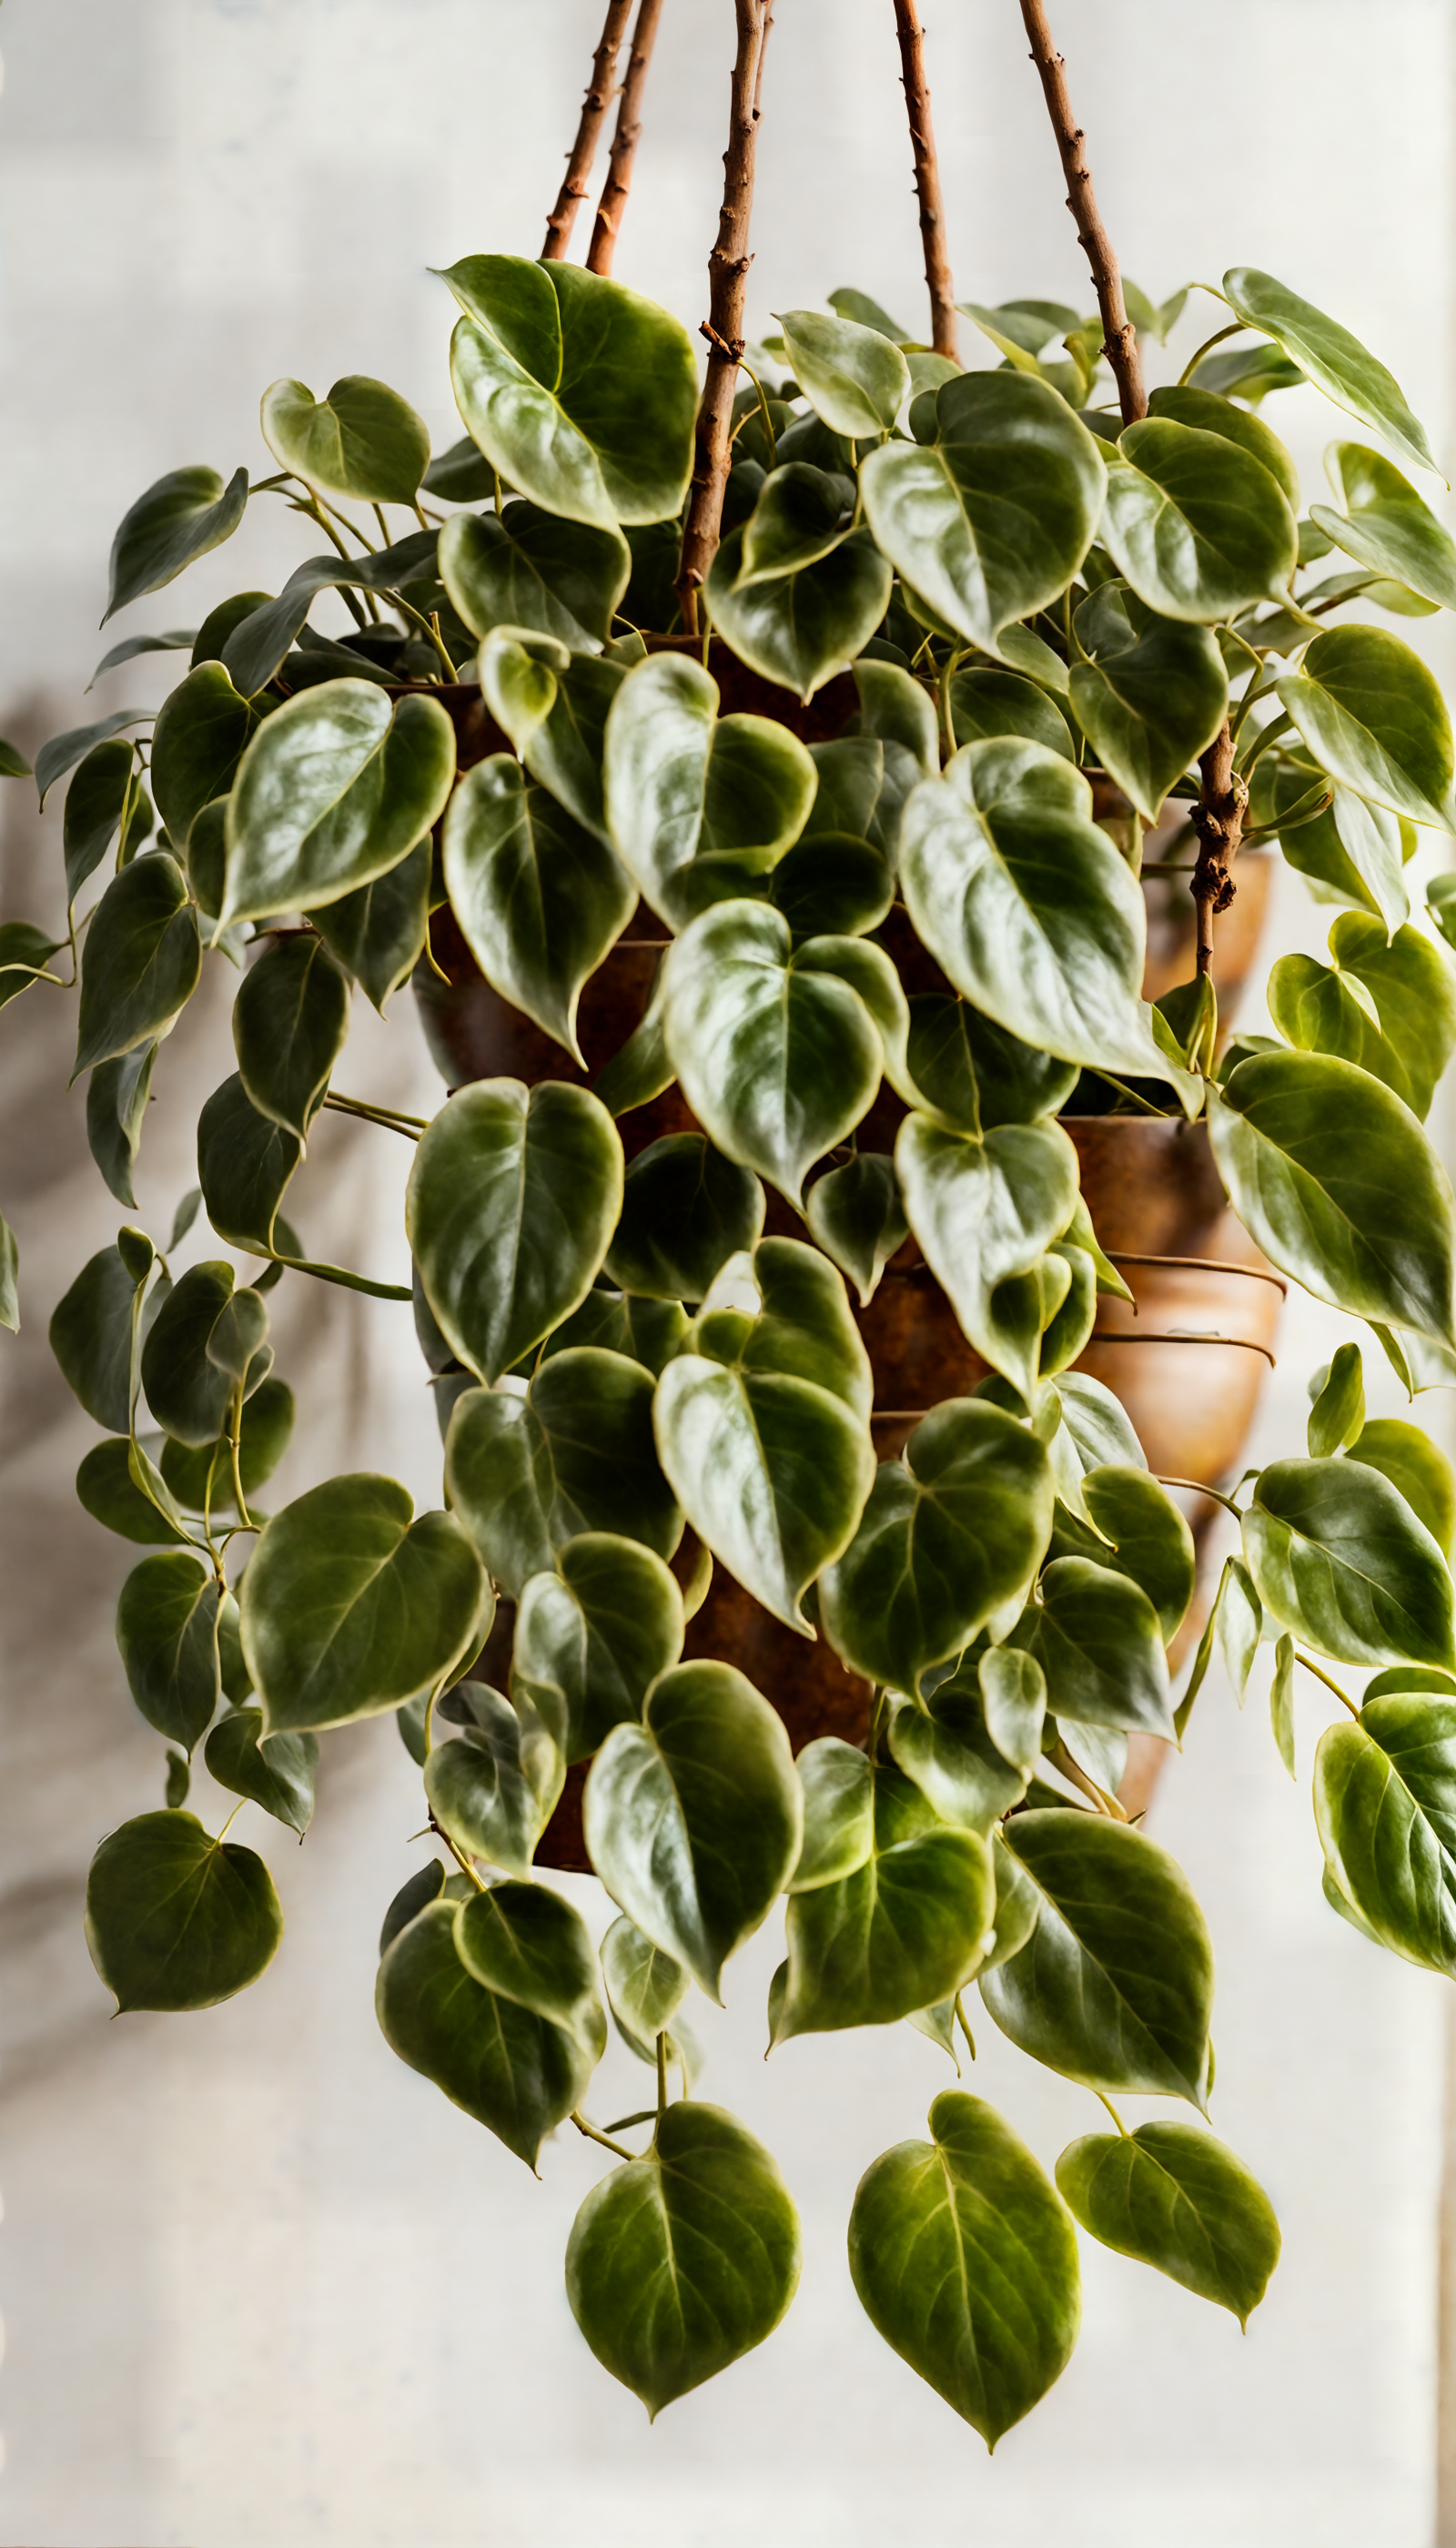 Peperomia serpens with distinctive leaves in a hanging planter, part of indoor decor with clear lighting.